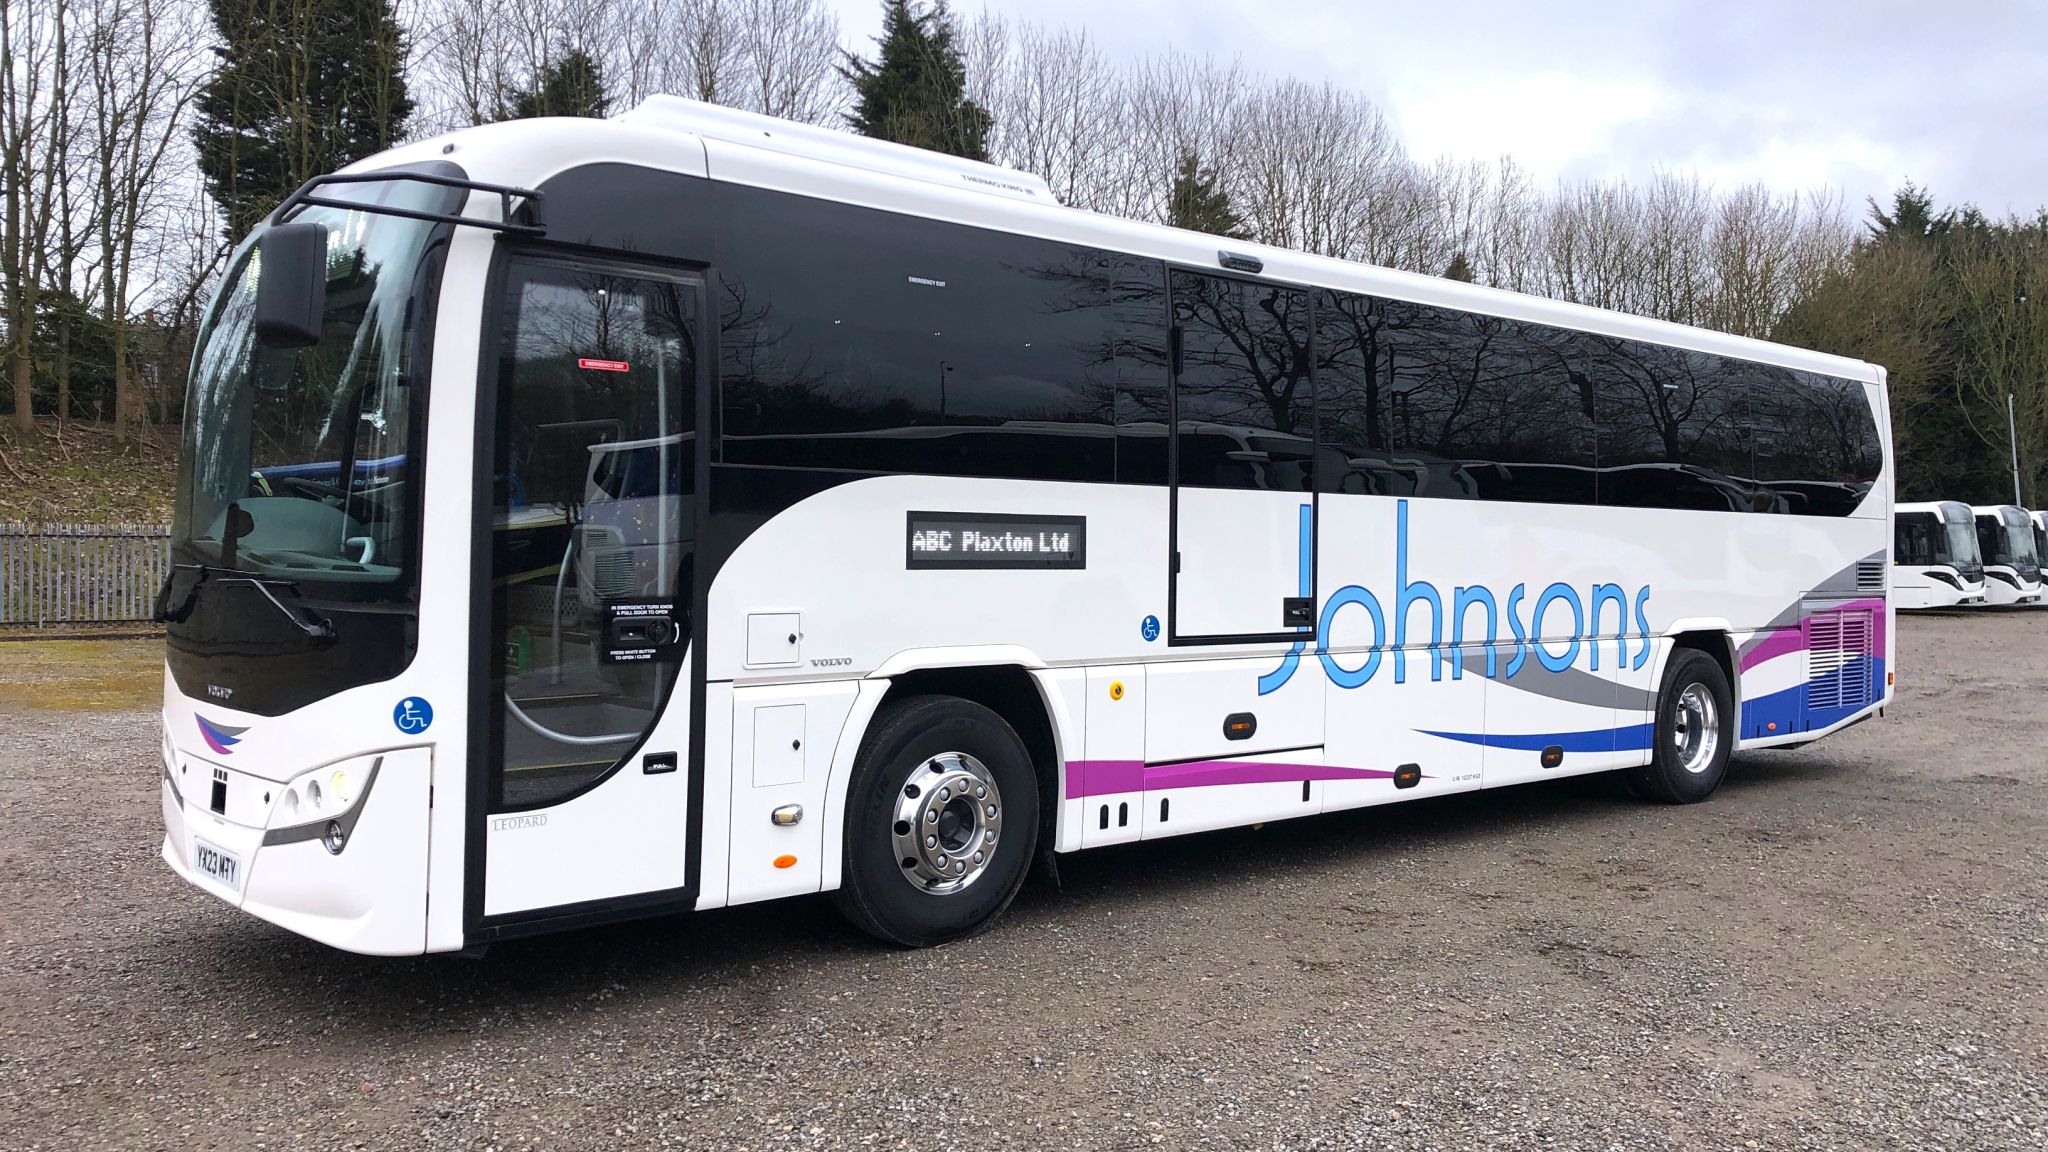 Volvo B9R Plaxton Leopard for Johnsons Coaches